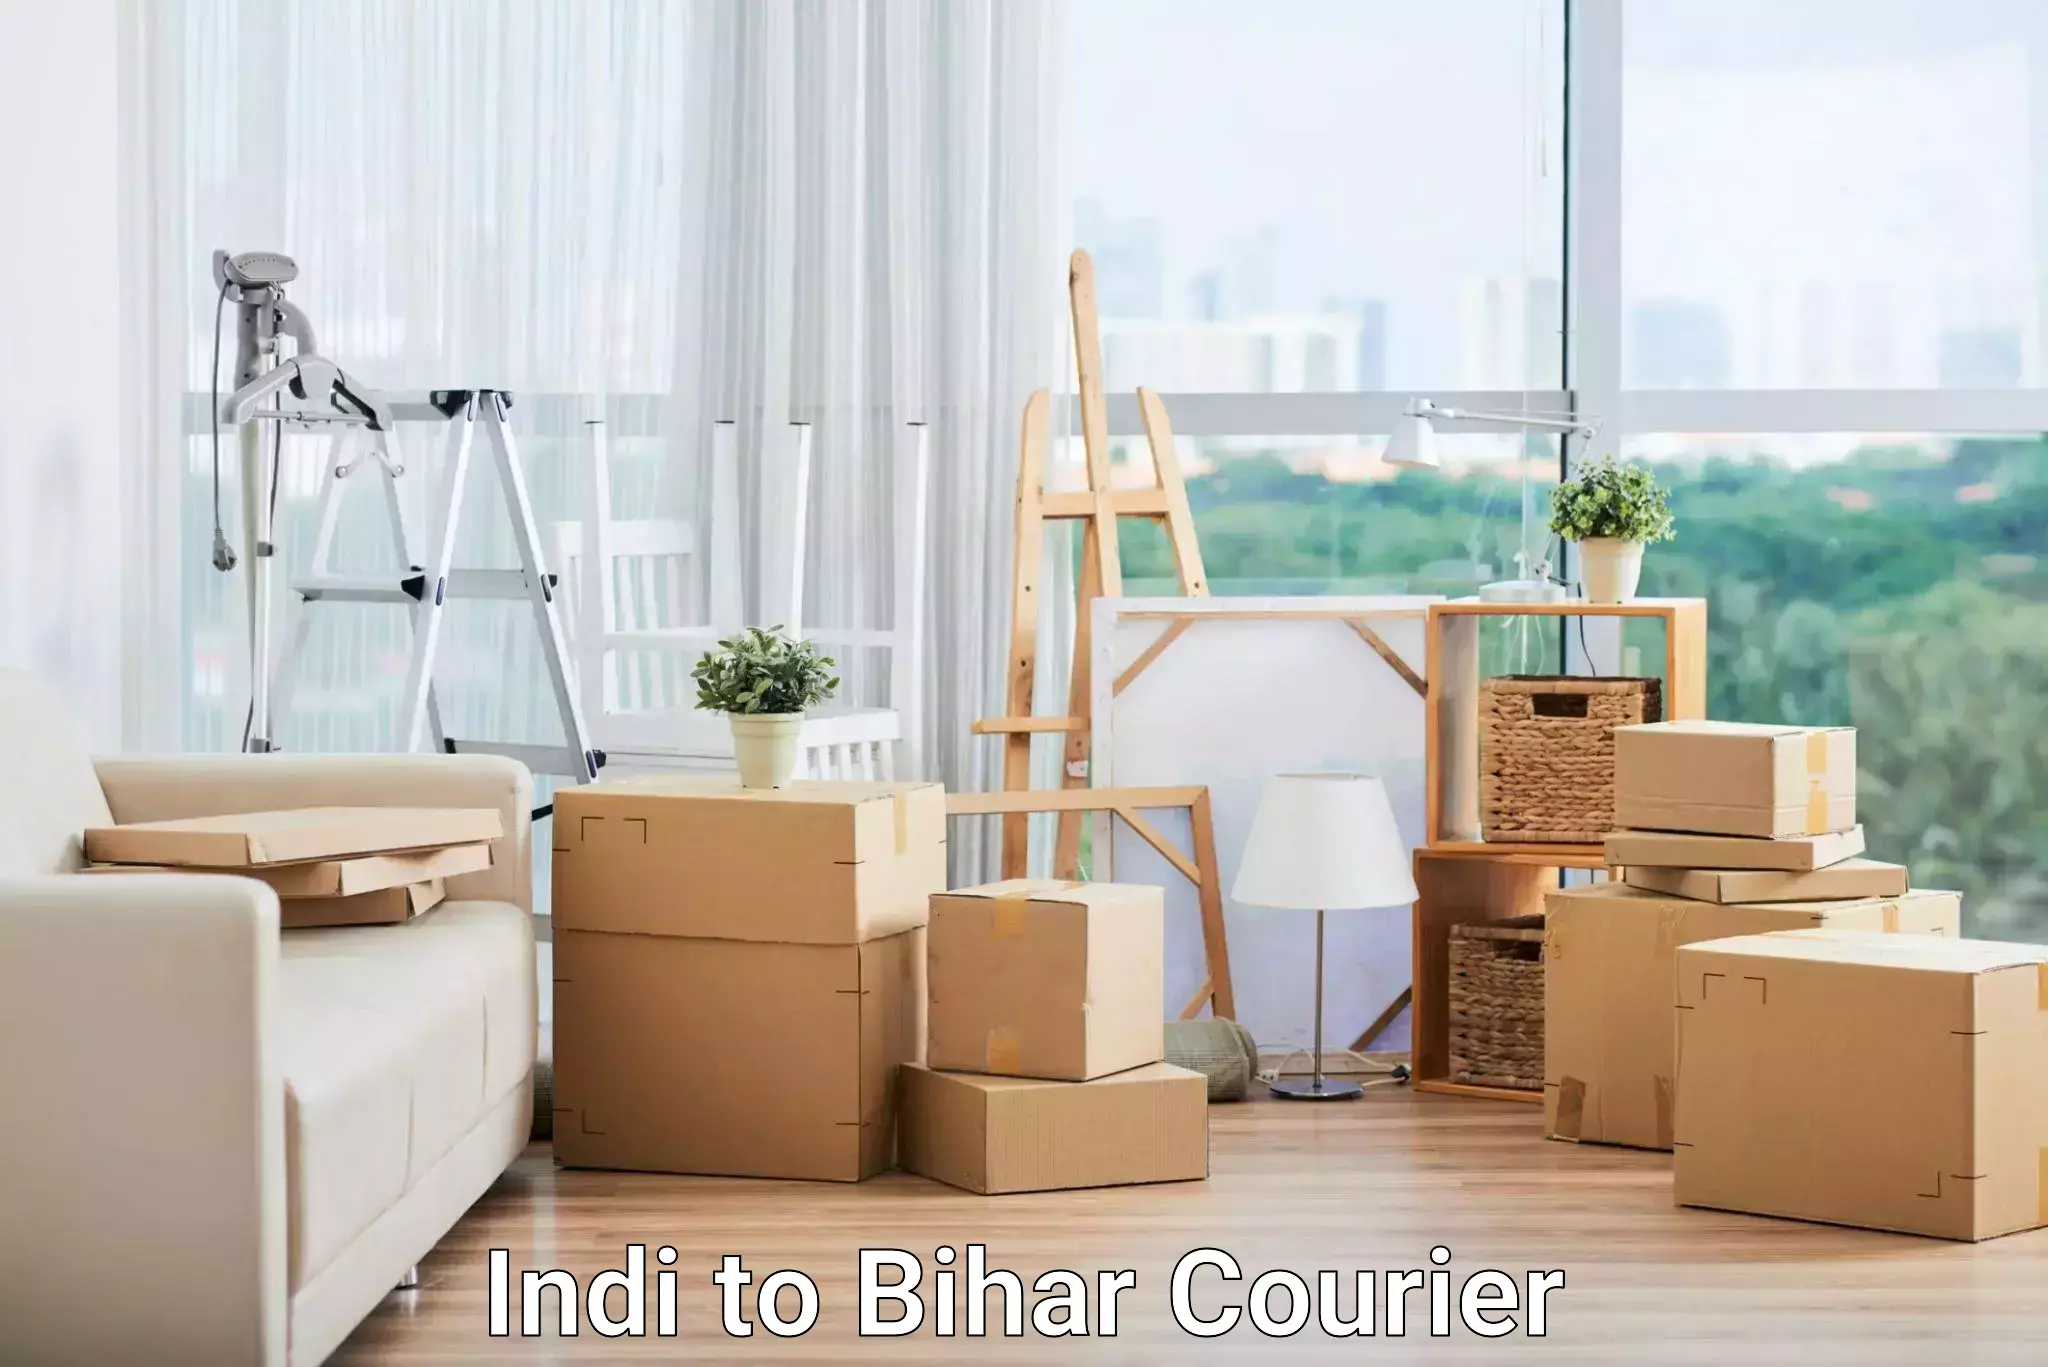 24-hour courier service Indi to Bihar